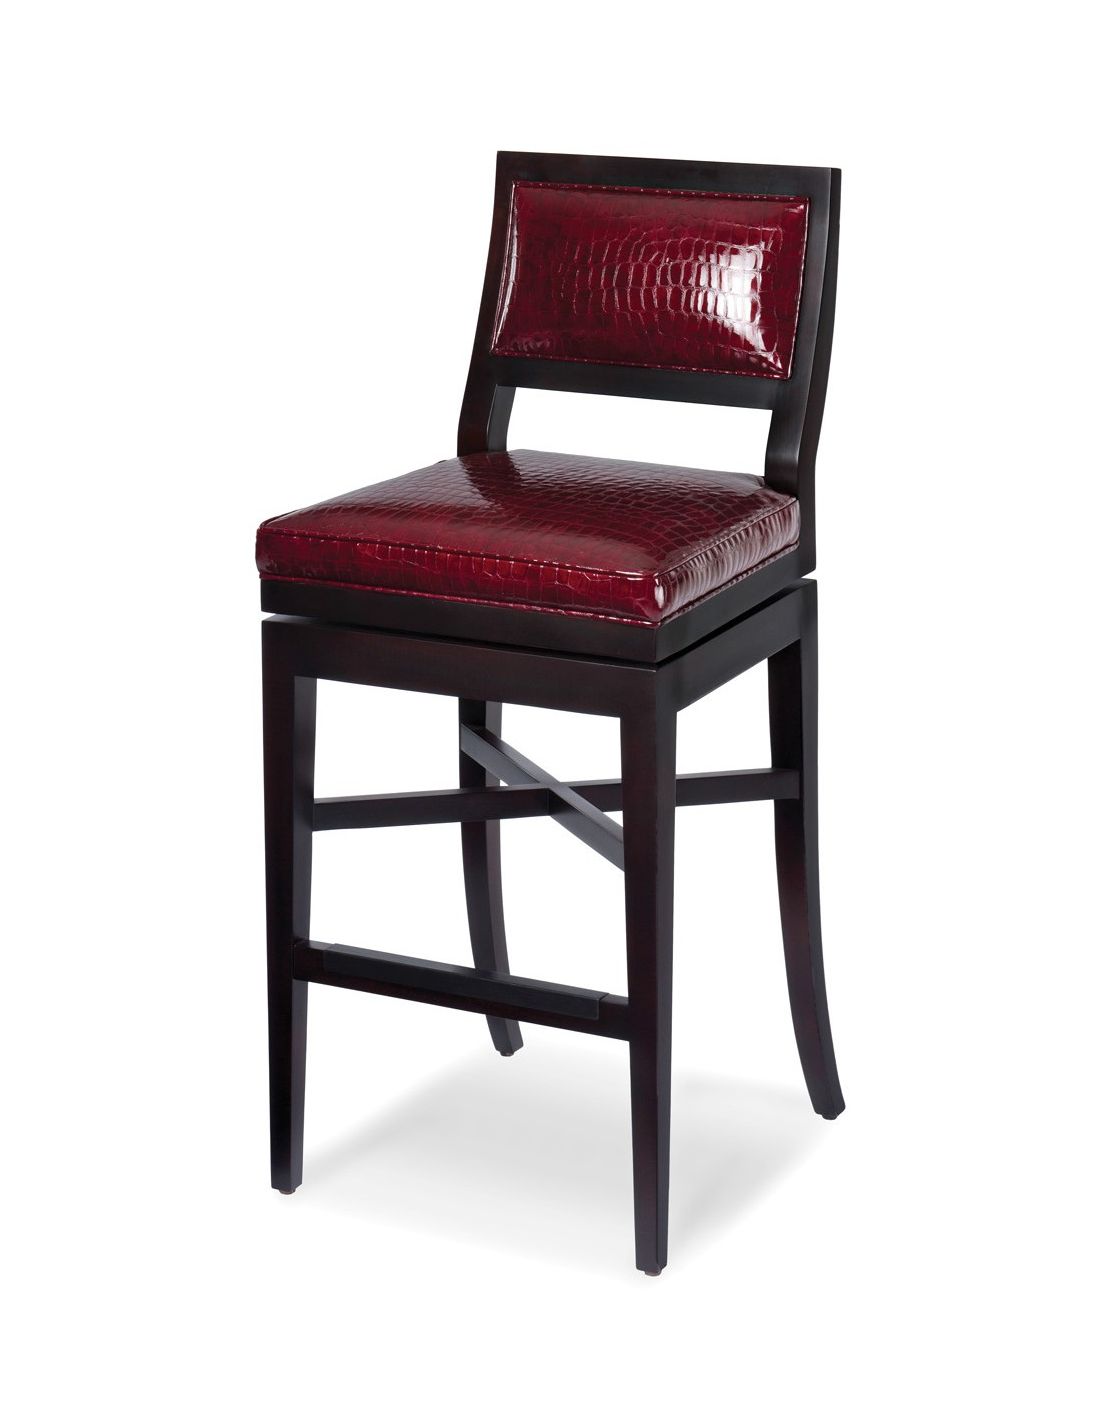 Red Patent Leather Bar Stools, Chesterfield Style Leather Bar Stool